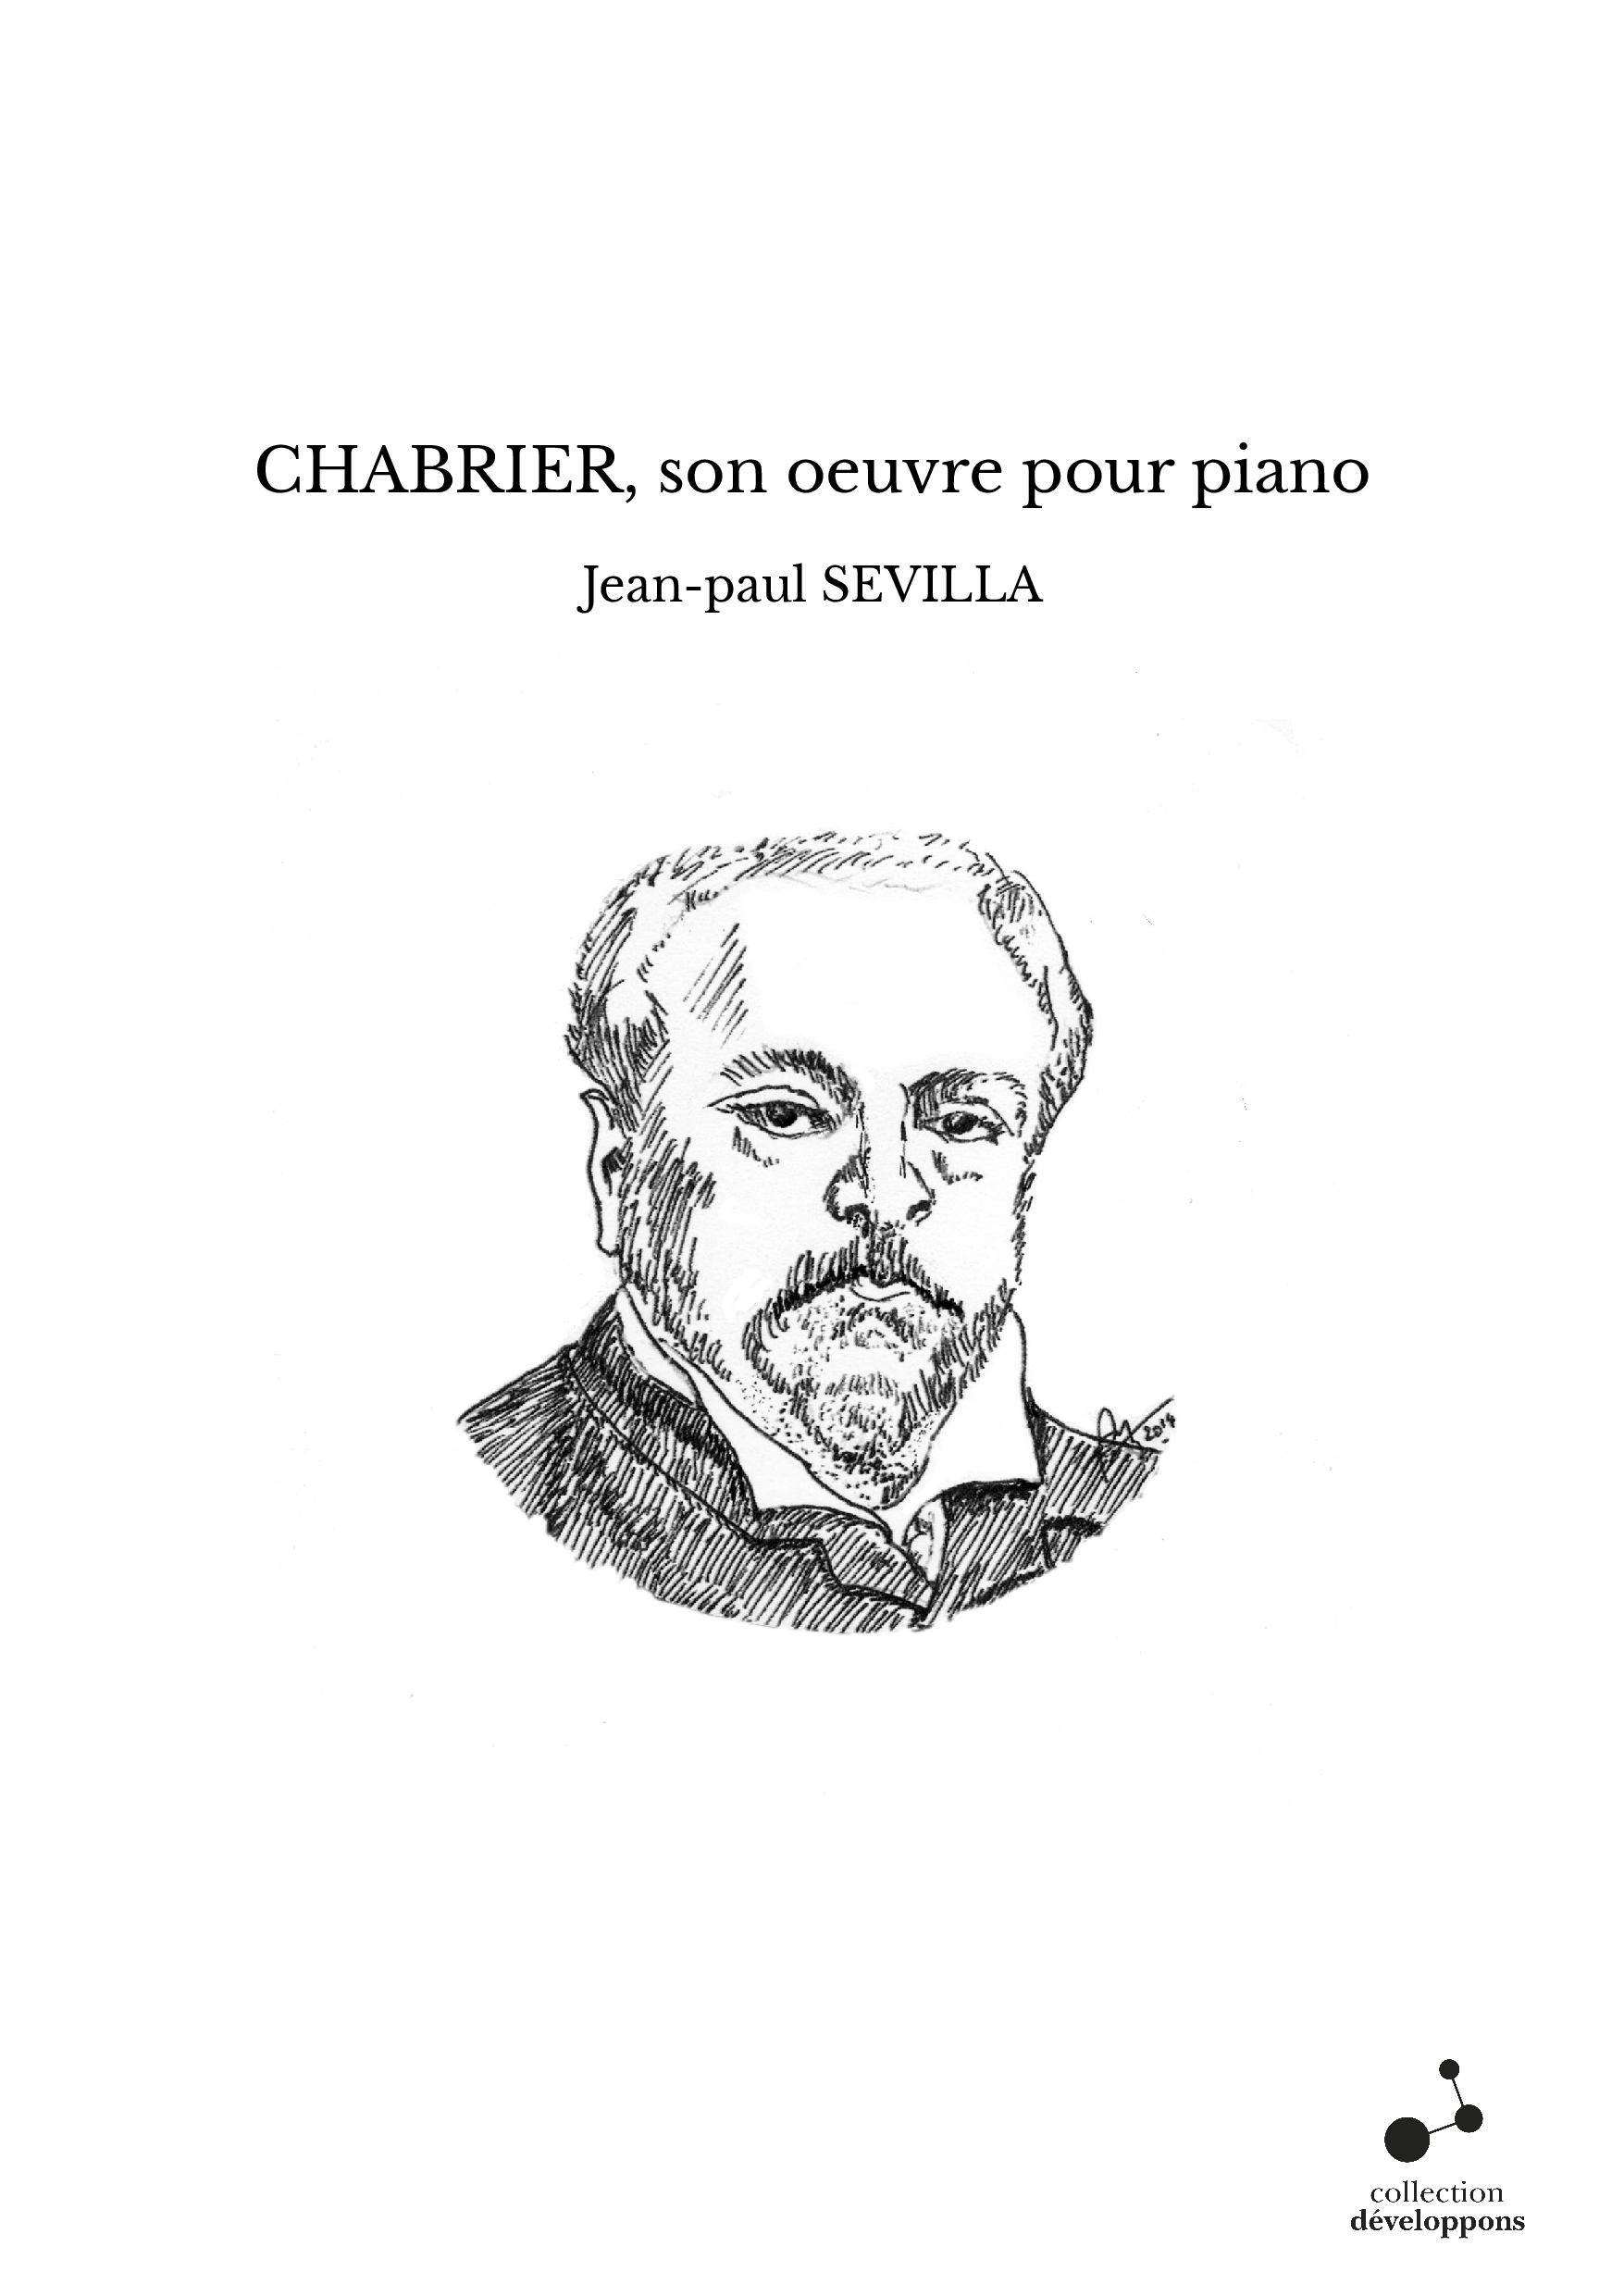 CHABRIER, son oeuvre pour piano